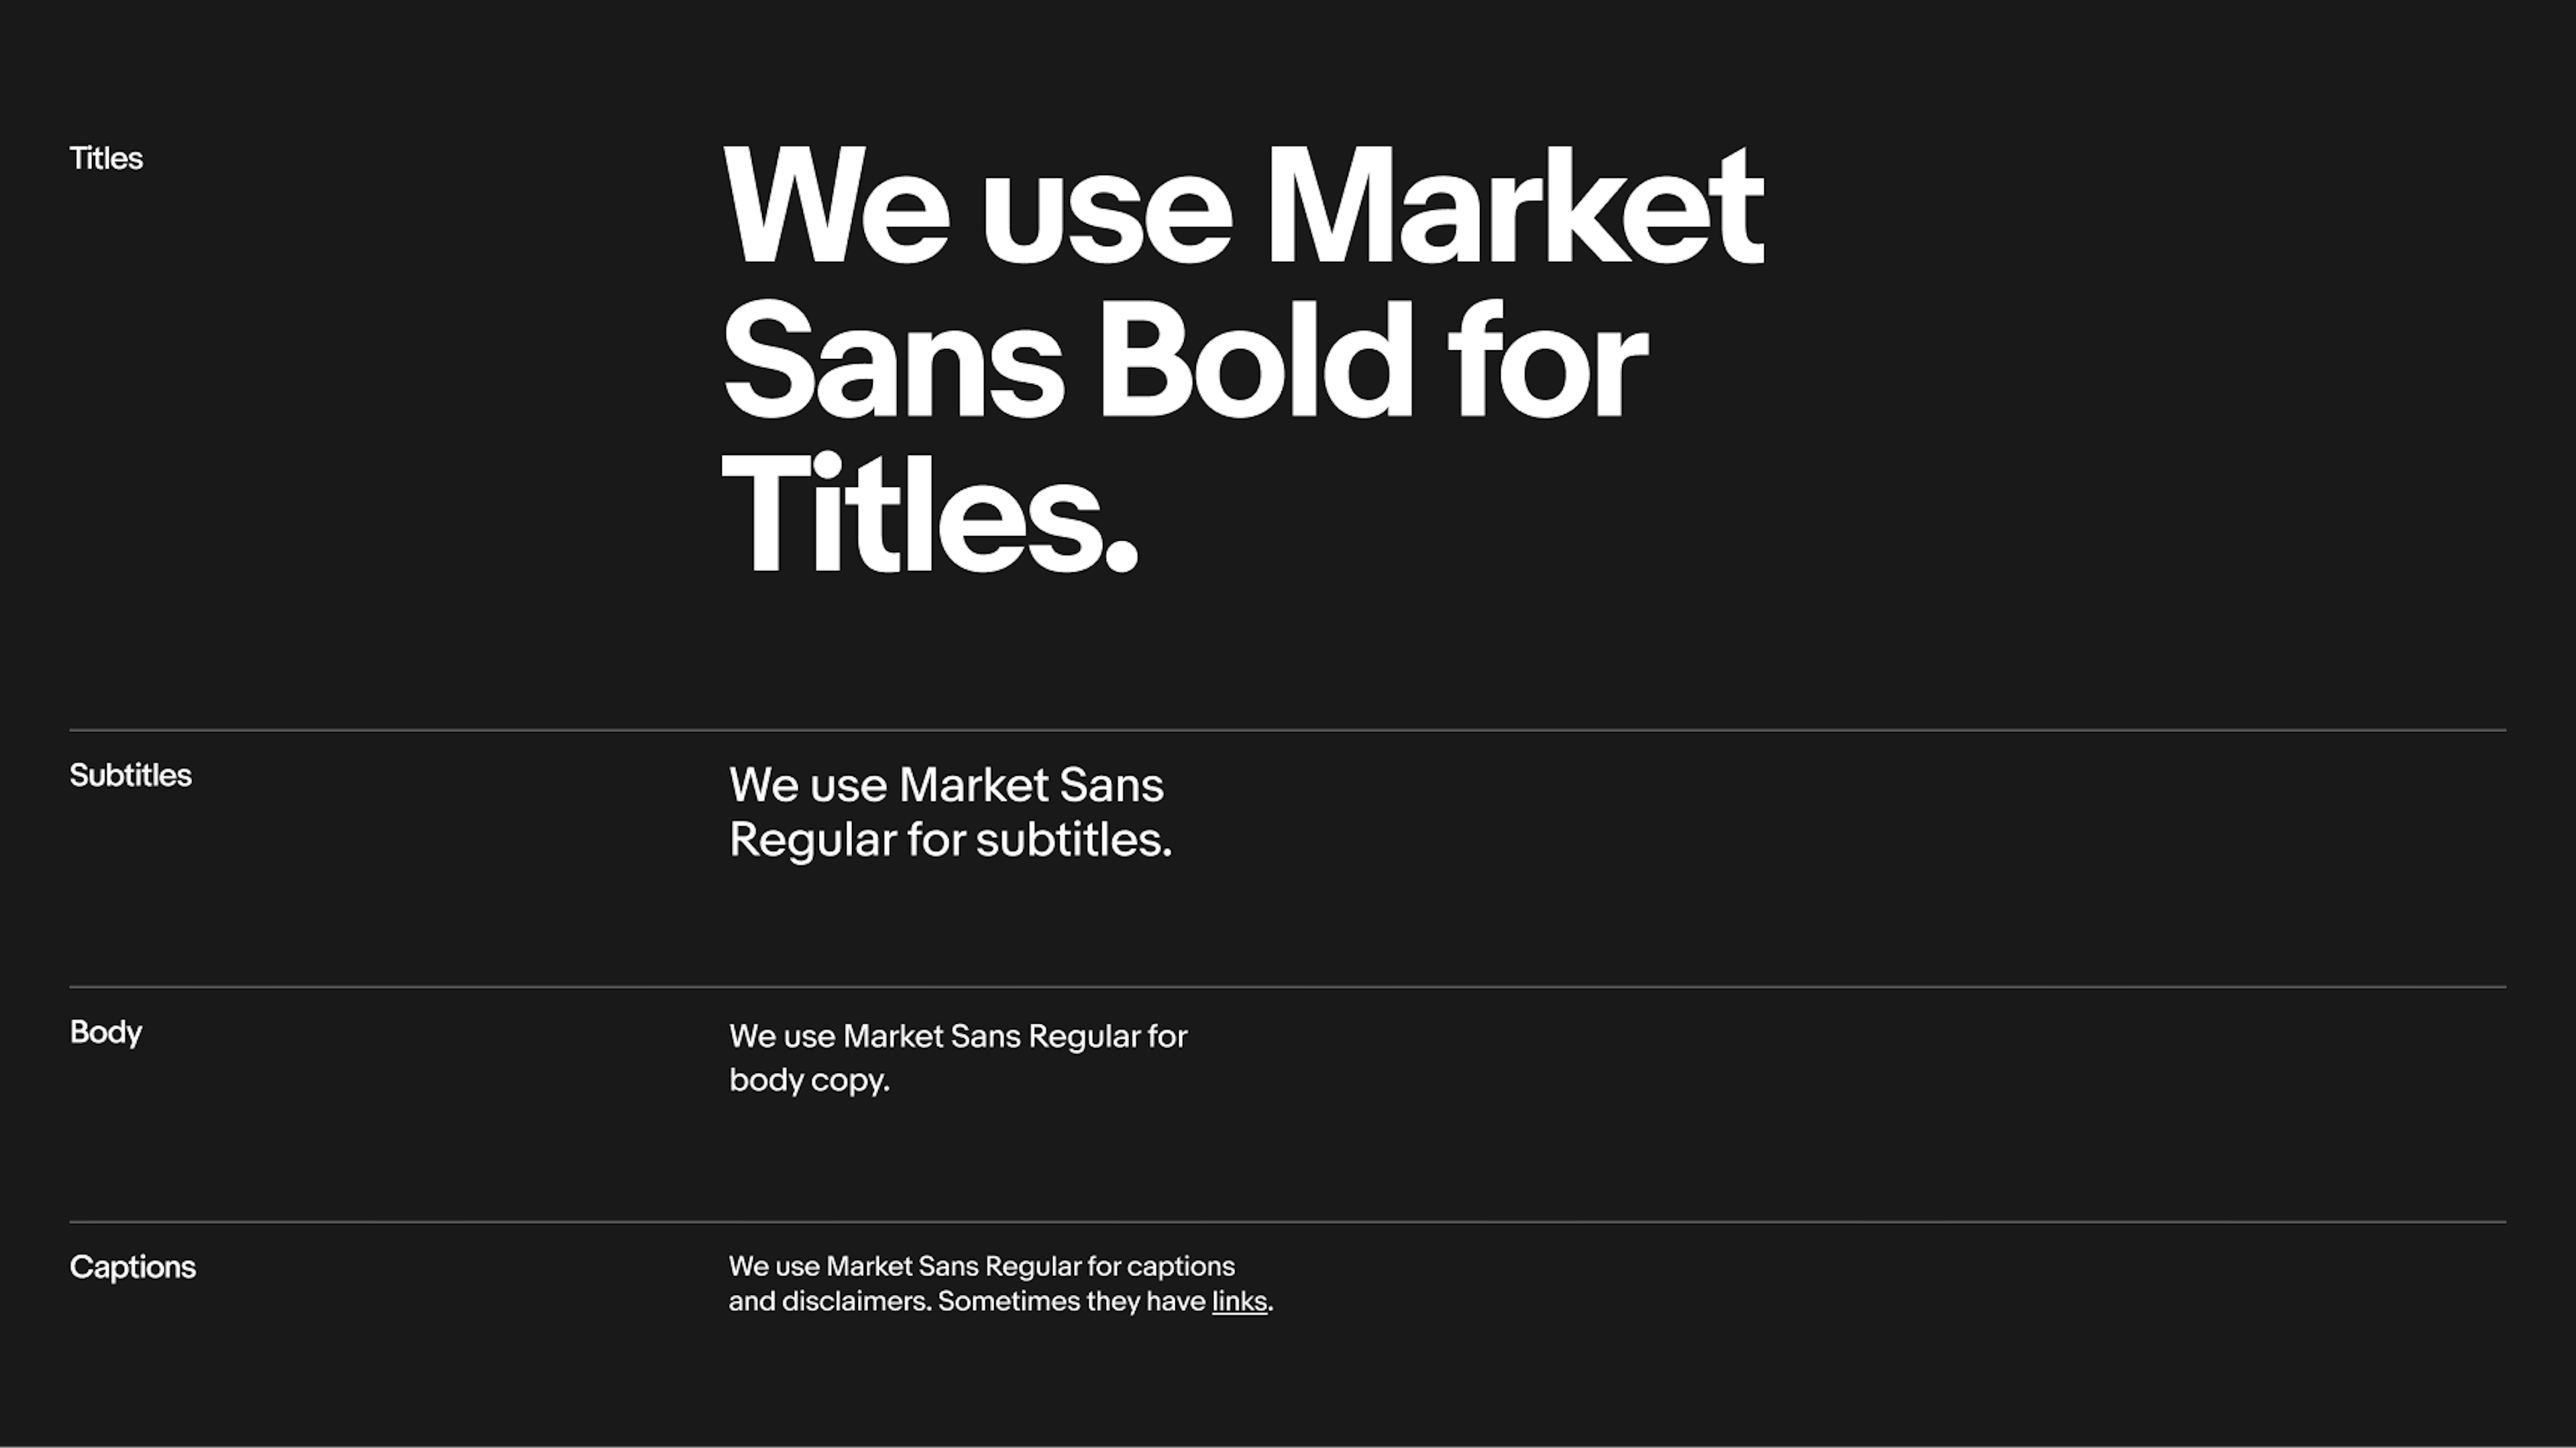 Giant Title Text: We use Market Sans Bold for Titles. Large Subtitle Text: We use Market Sans Regular for subtitles. Regular Body Text: We use Market Sans Regular for body copy. Small Captions Text: We use Market Sans regular for disclaimers and captions. Sometimes they have underlined links.